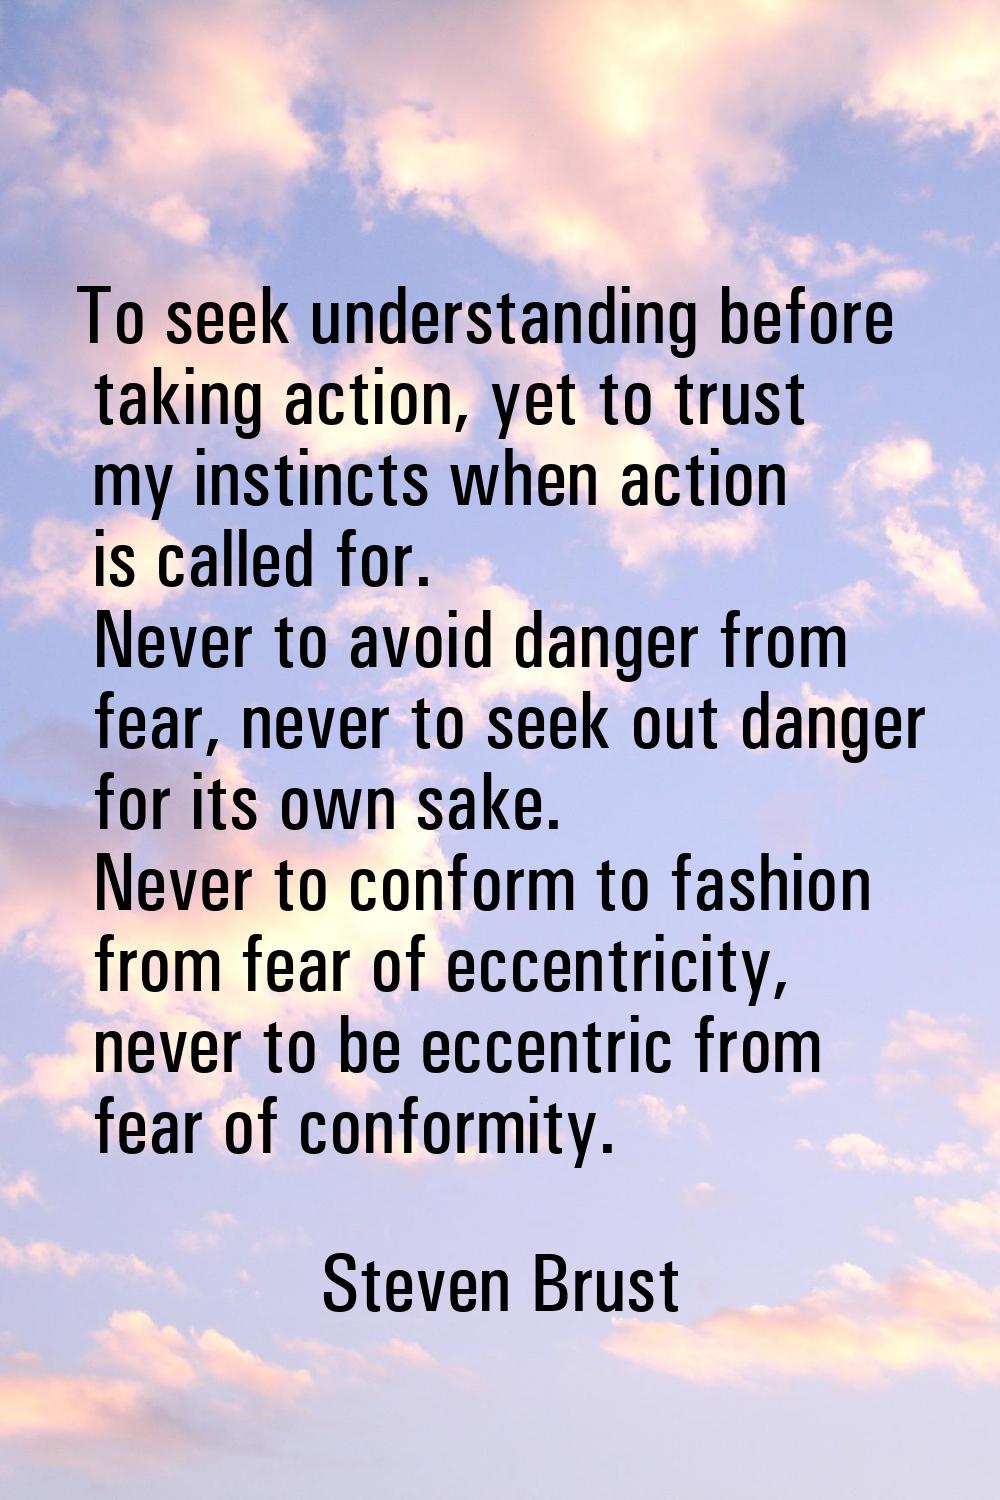 To seek understanding before taking action, yet to trust my instincts when action is called for. Ne